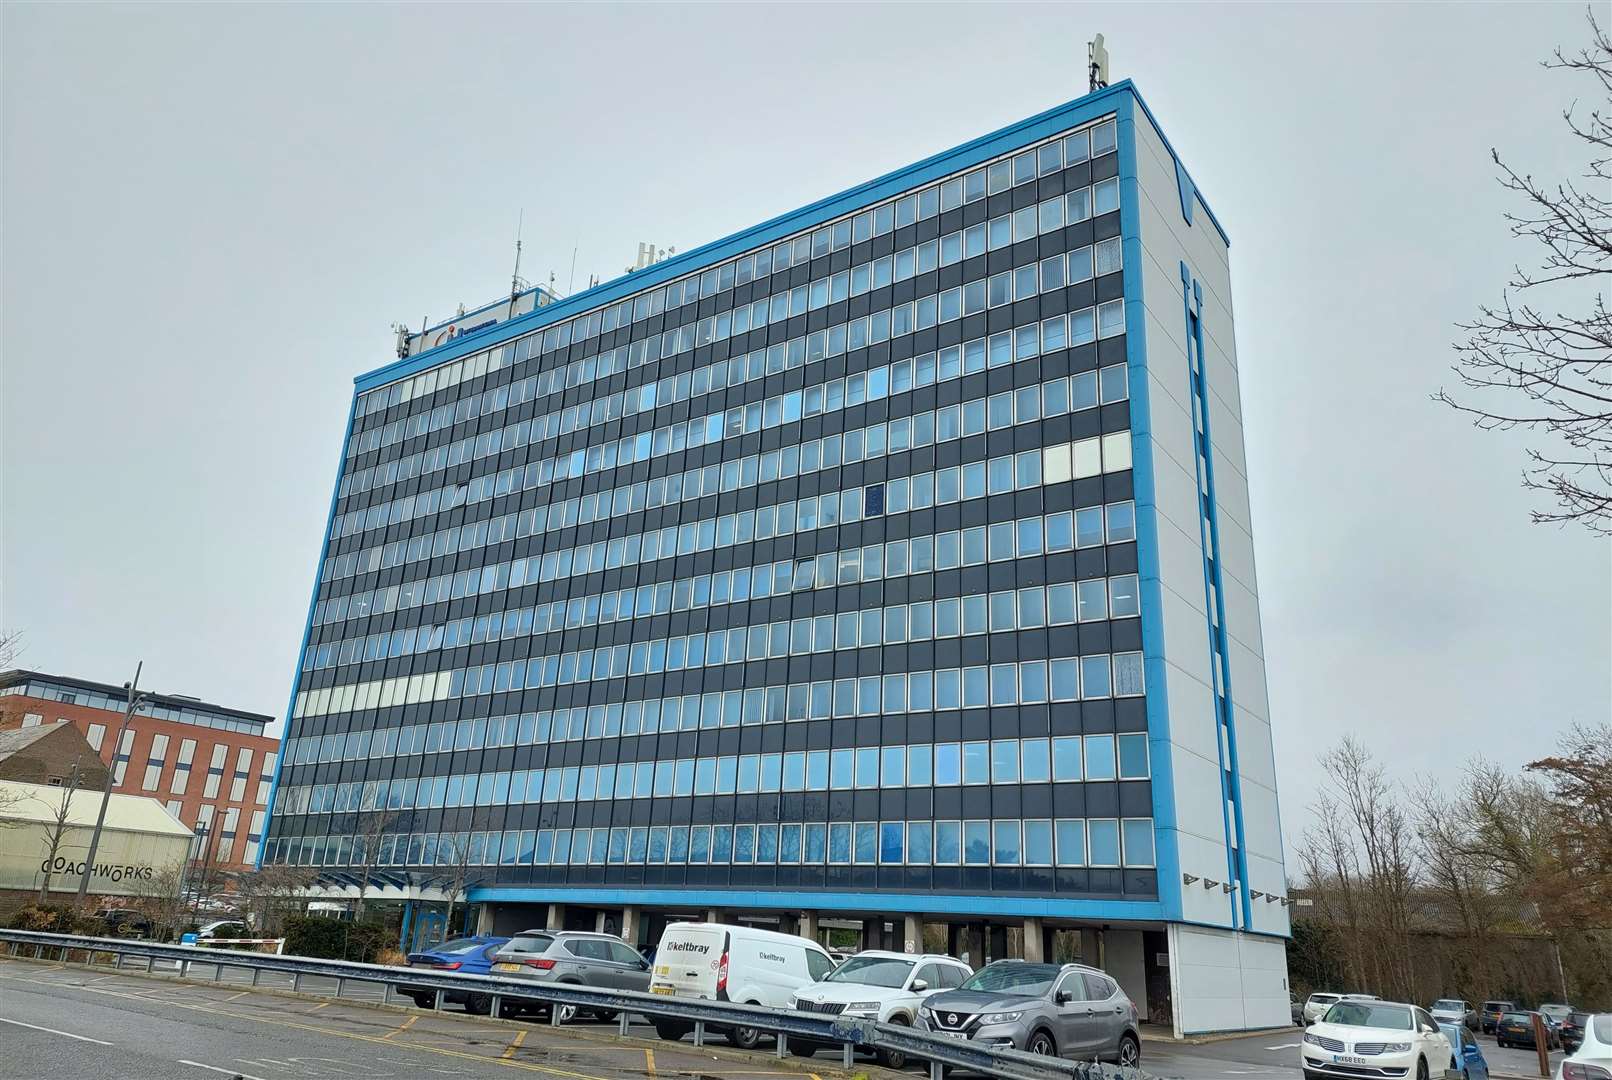 Ashford Borough Council’s offices could relocate to International House